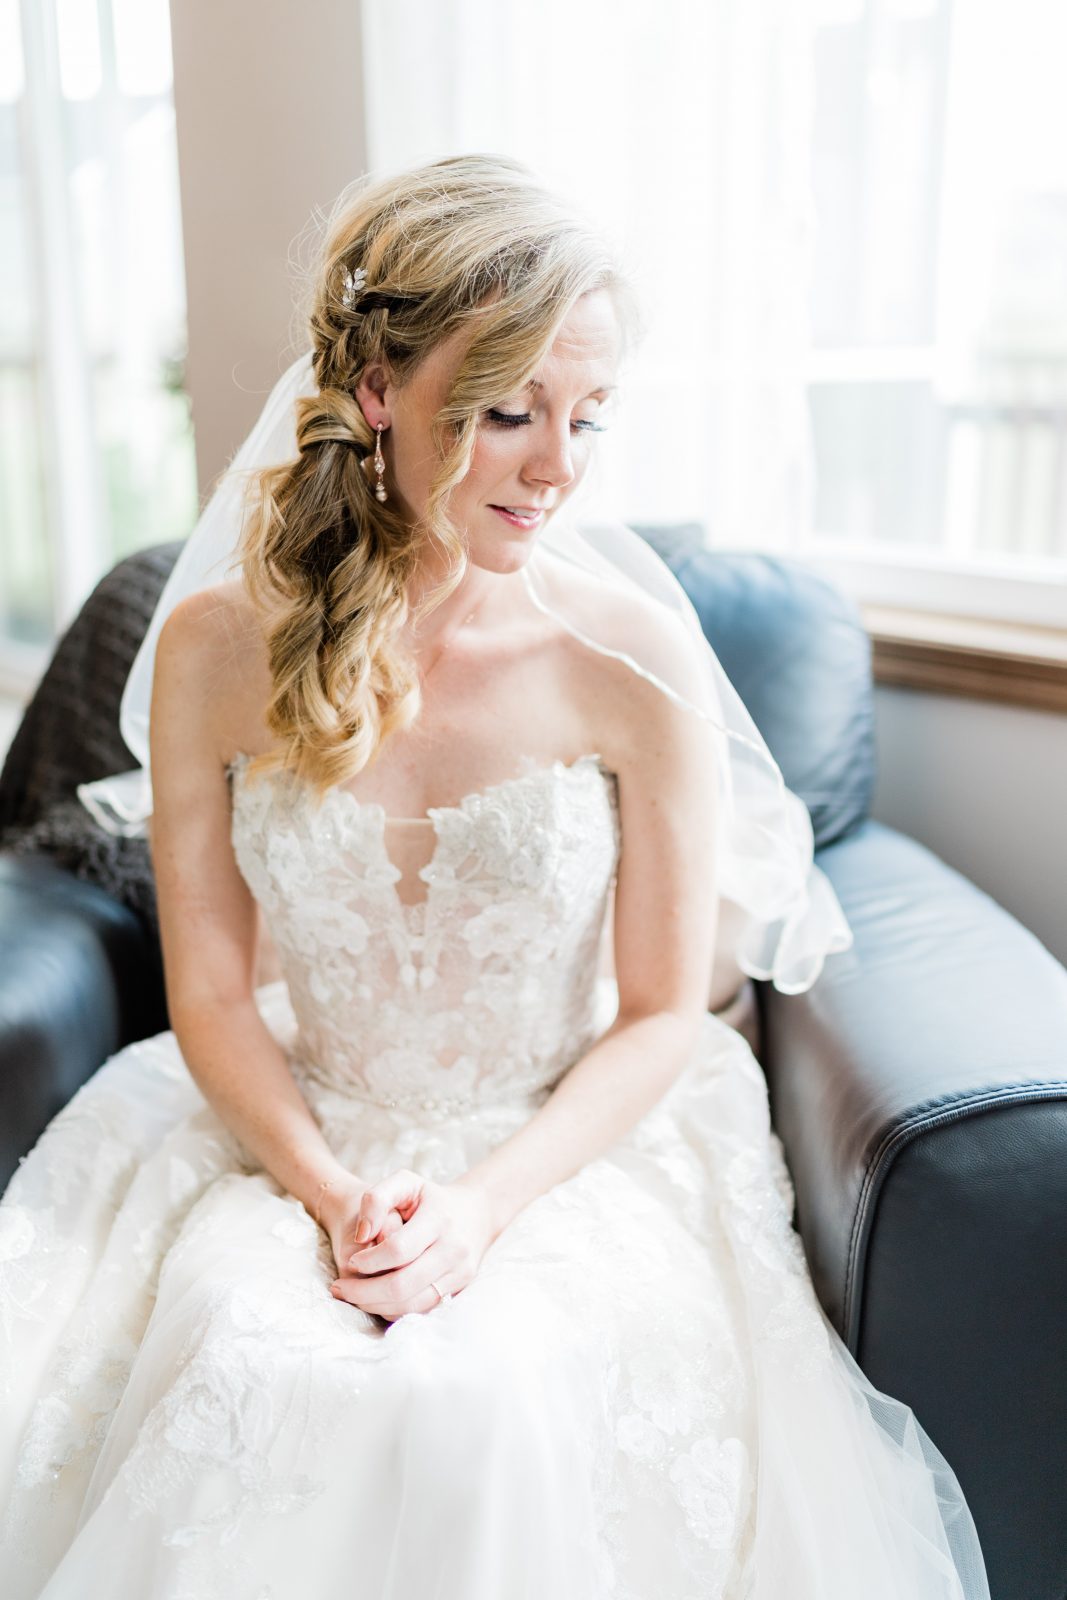 Bride Getting Ready Olive Branch Events Co.